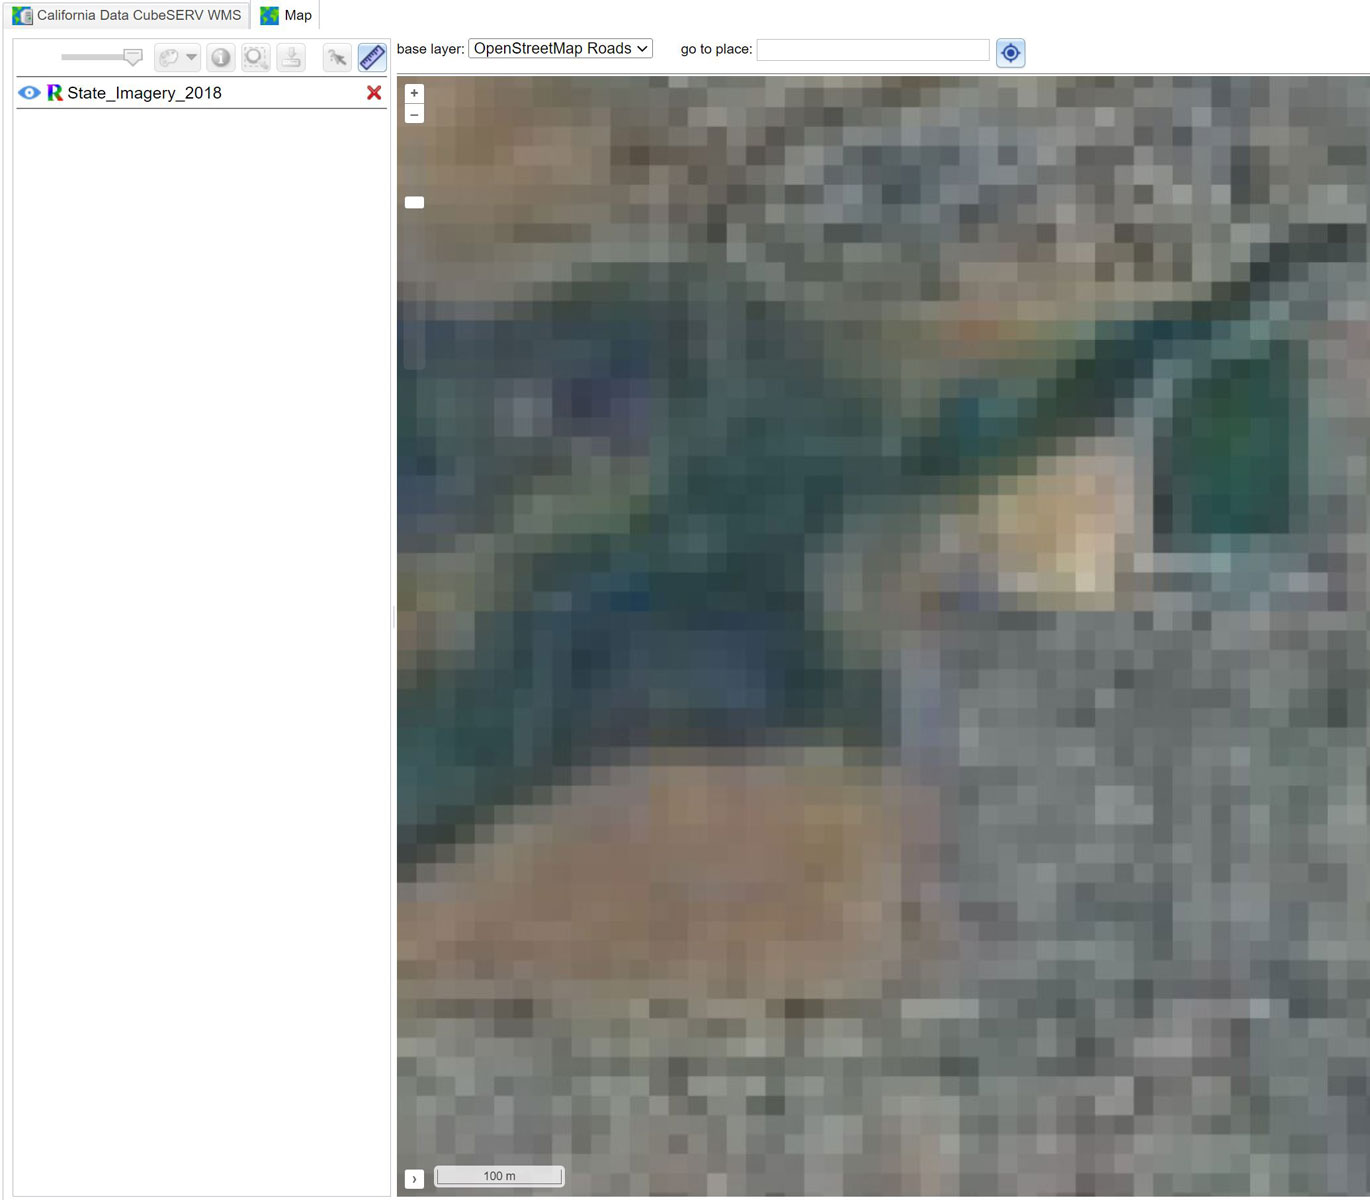 User A with limited map layers and a resolution limit of 20m/pixel